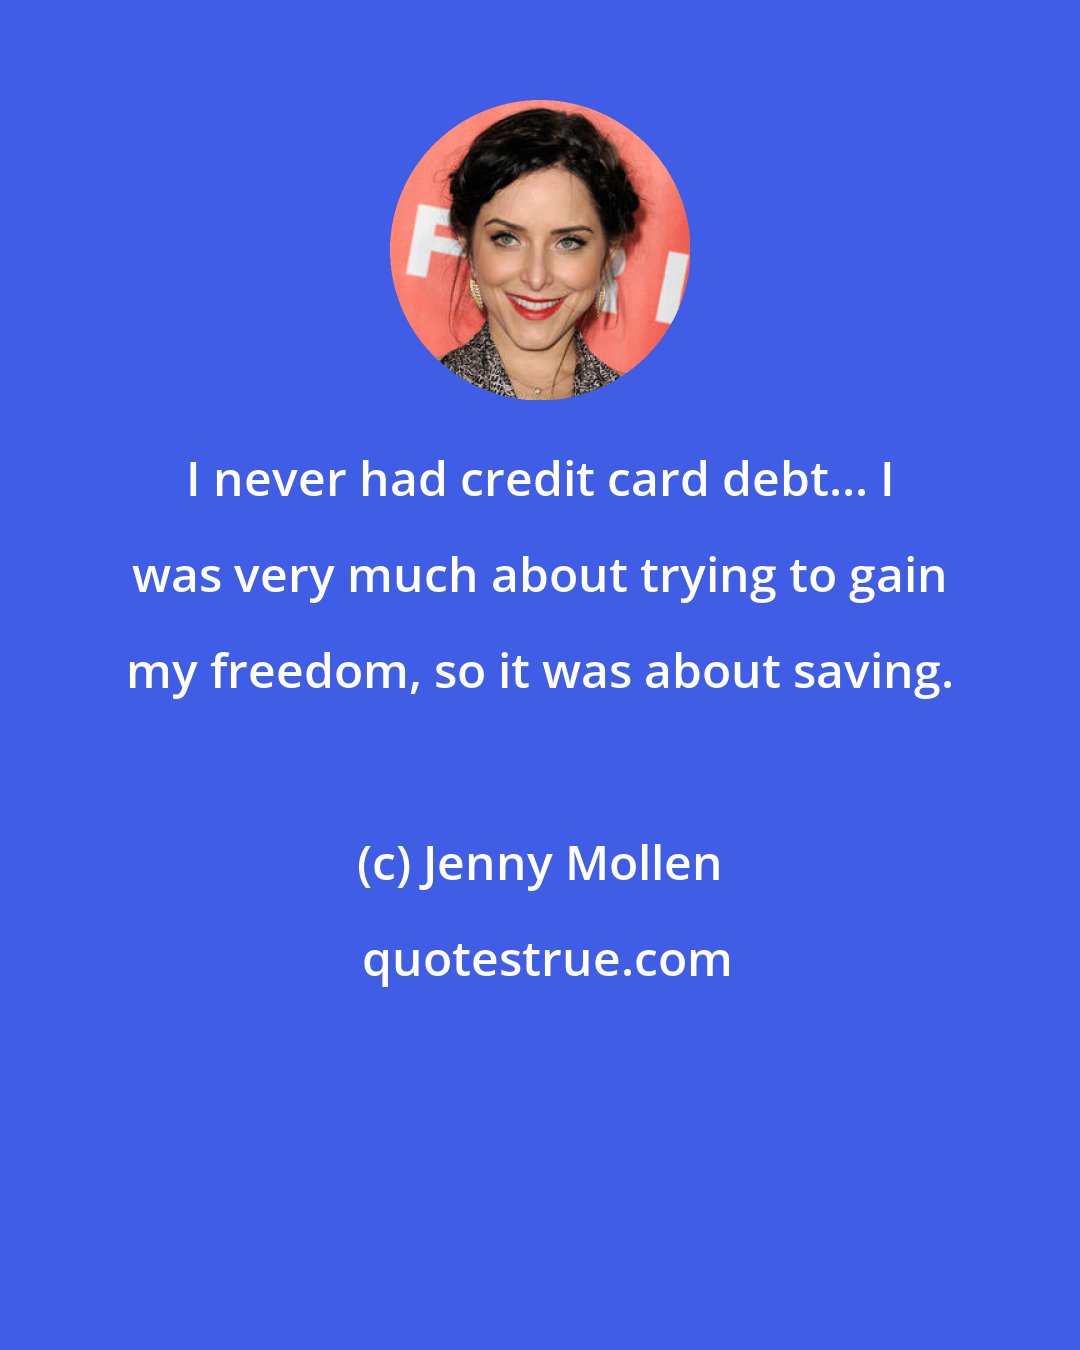 Jenny Mollen: I never had credit card debt... I was very much about trying to gain my freedom, so it was about saving.